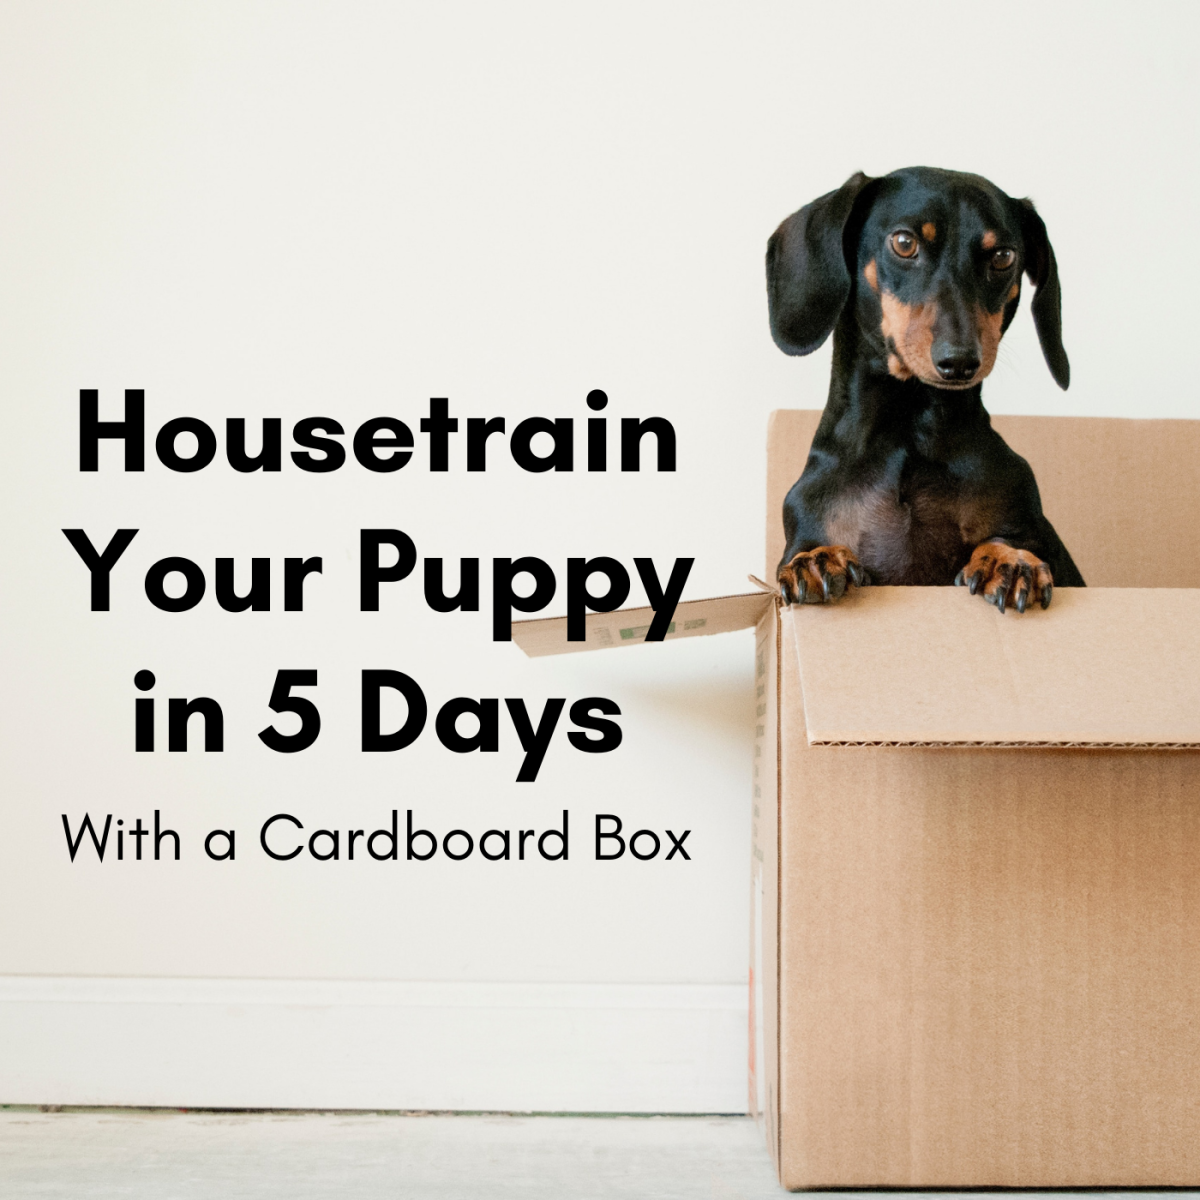 You can housetrain your dog in just five days with a cardboard box.